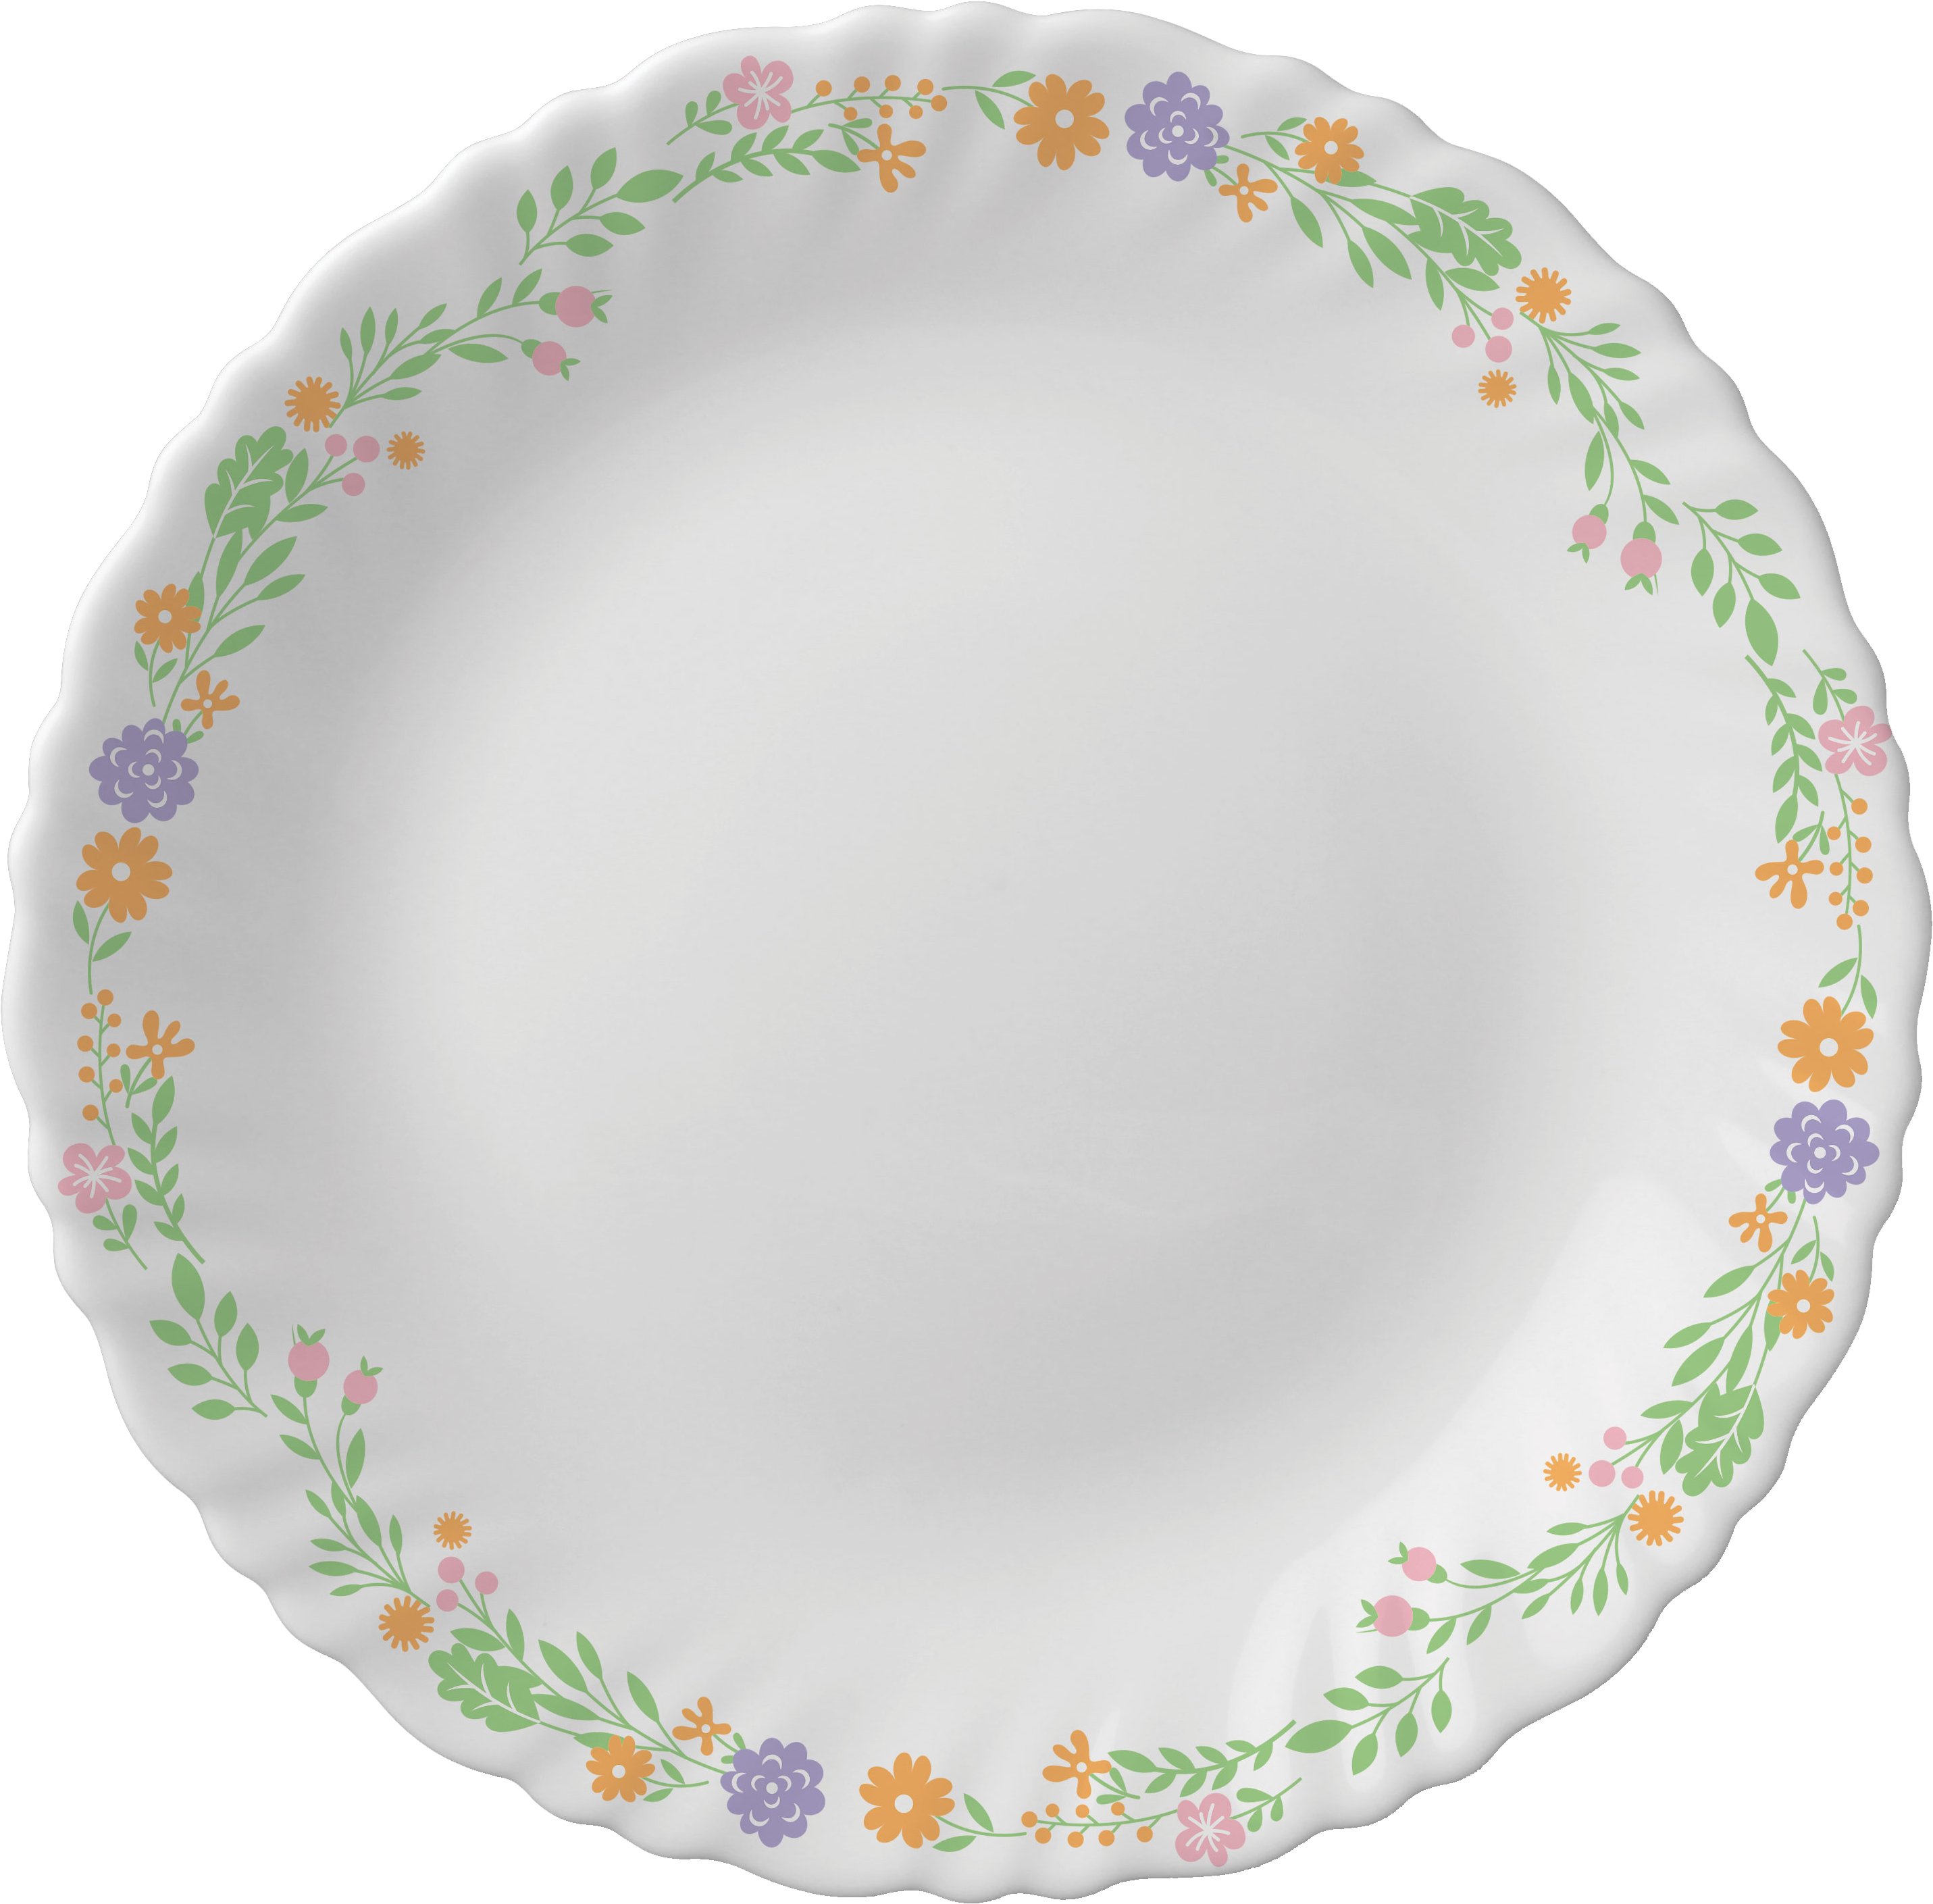 White Crockery With Floral Design